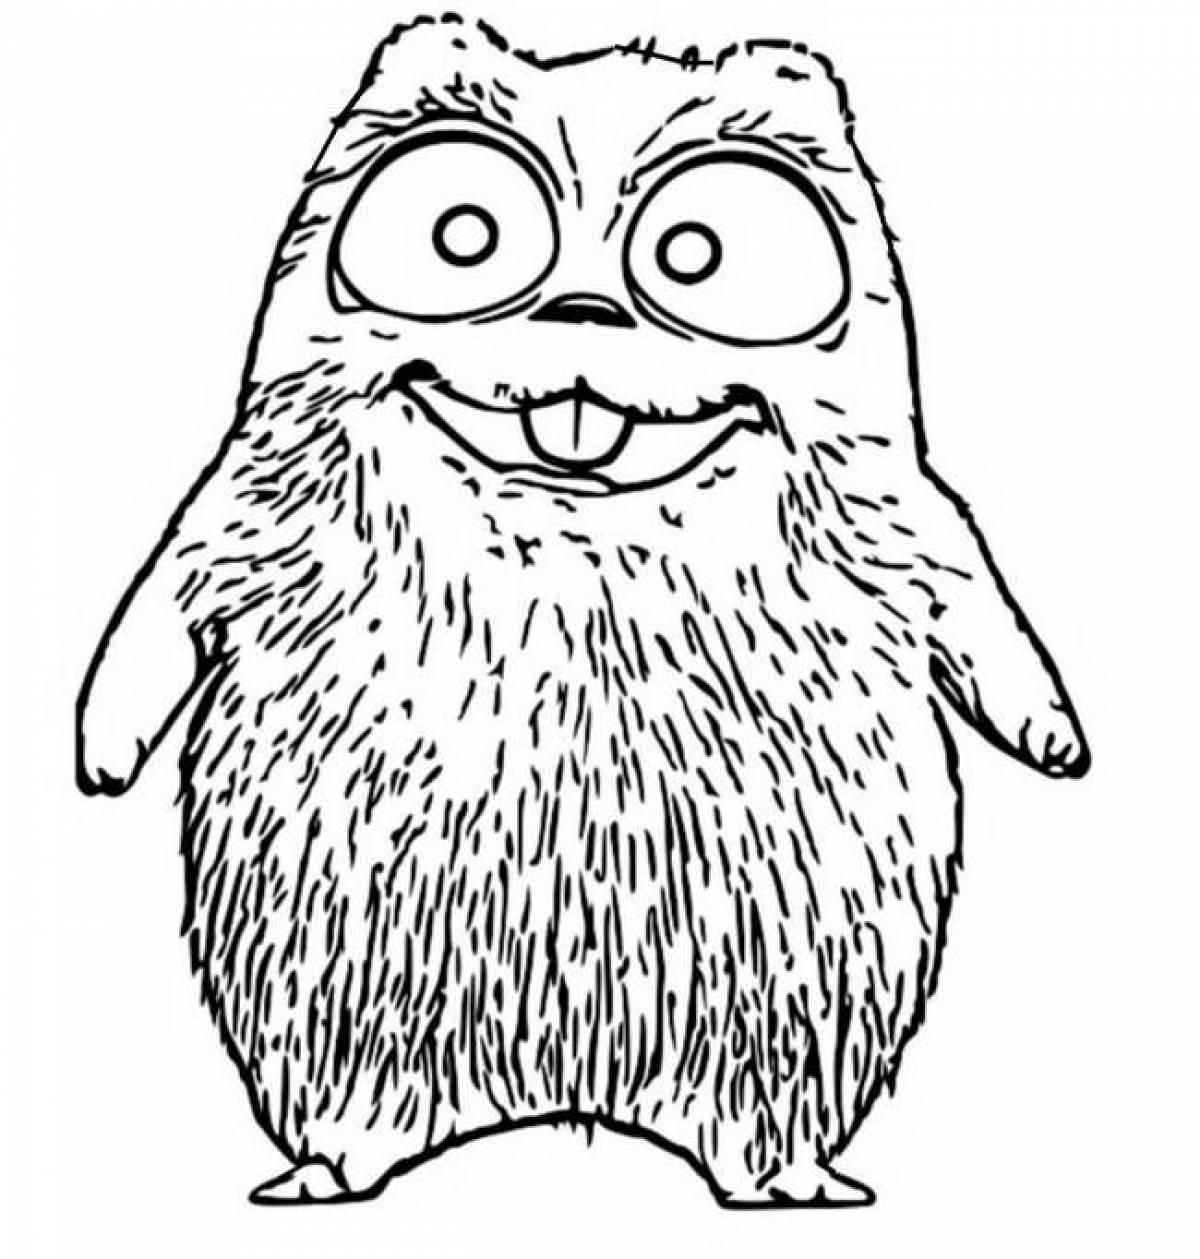 Gorgeous grizzlies and lemmings coloring page